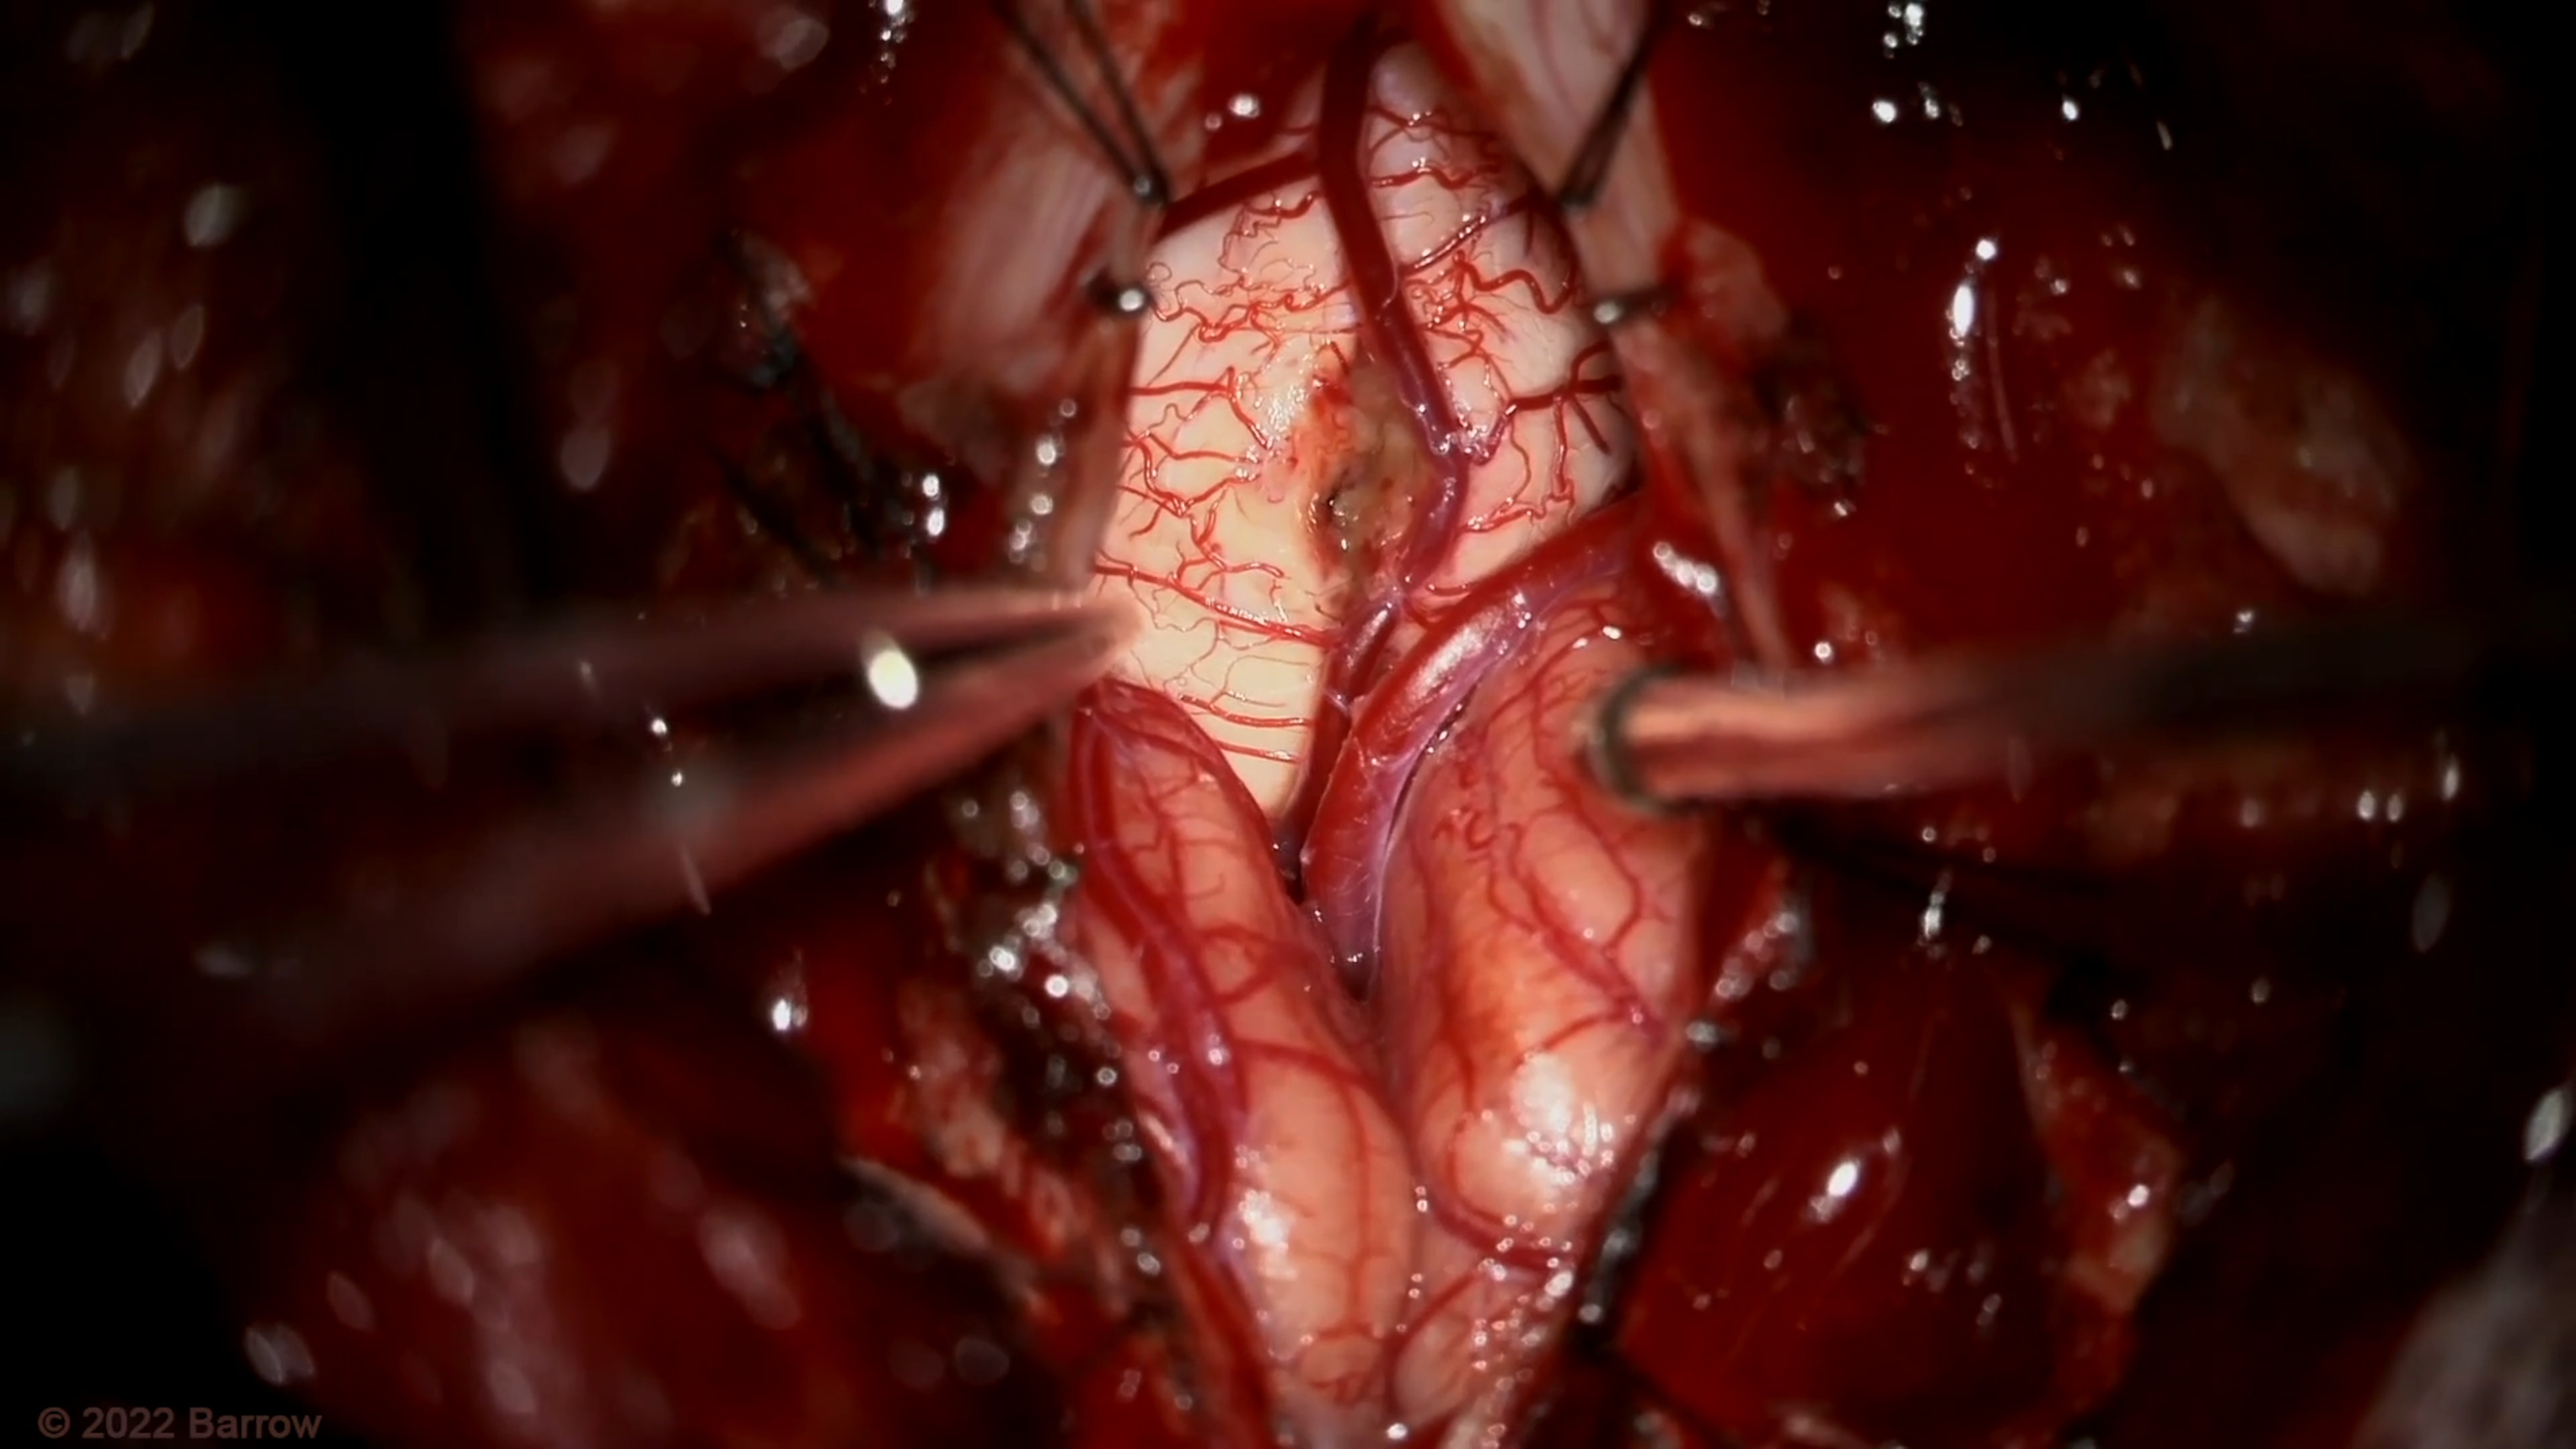 #168: Microsurgical Resection of an Inferior Medullary Cavernous Malformation